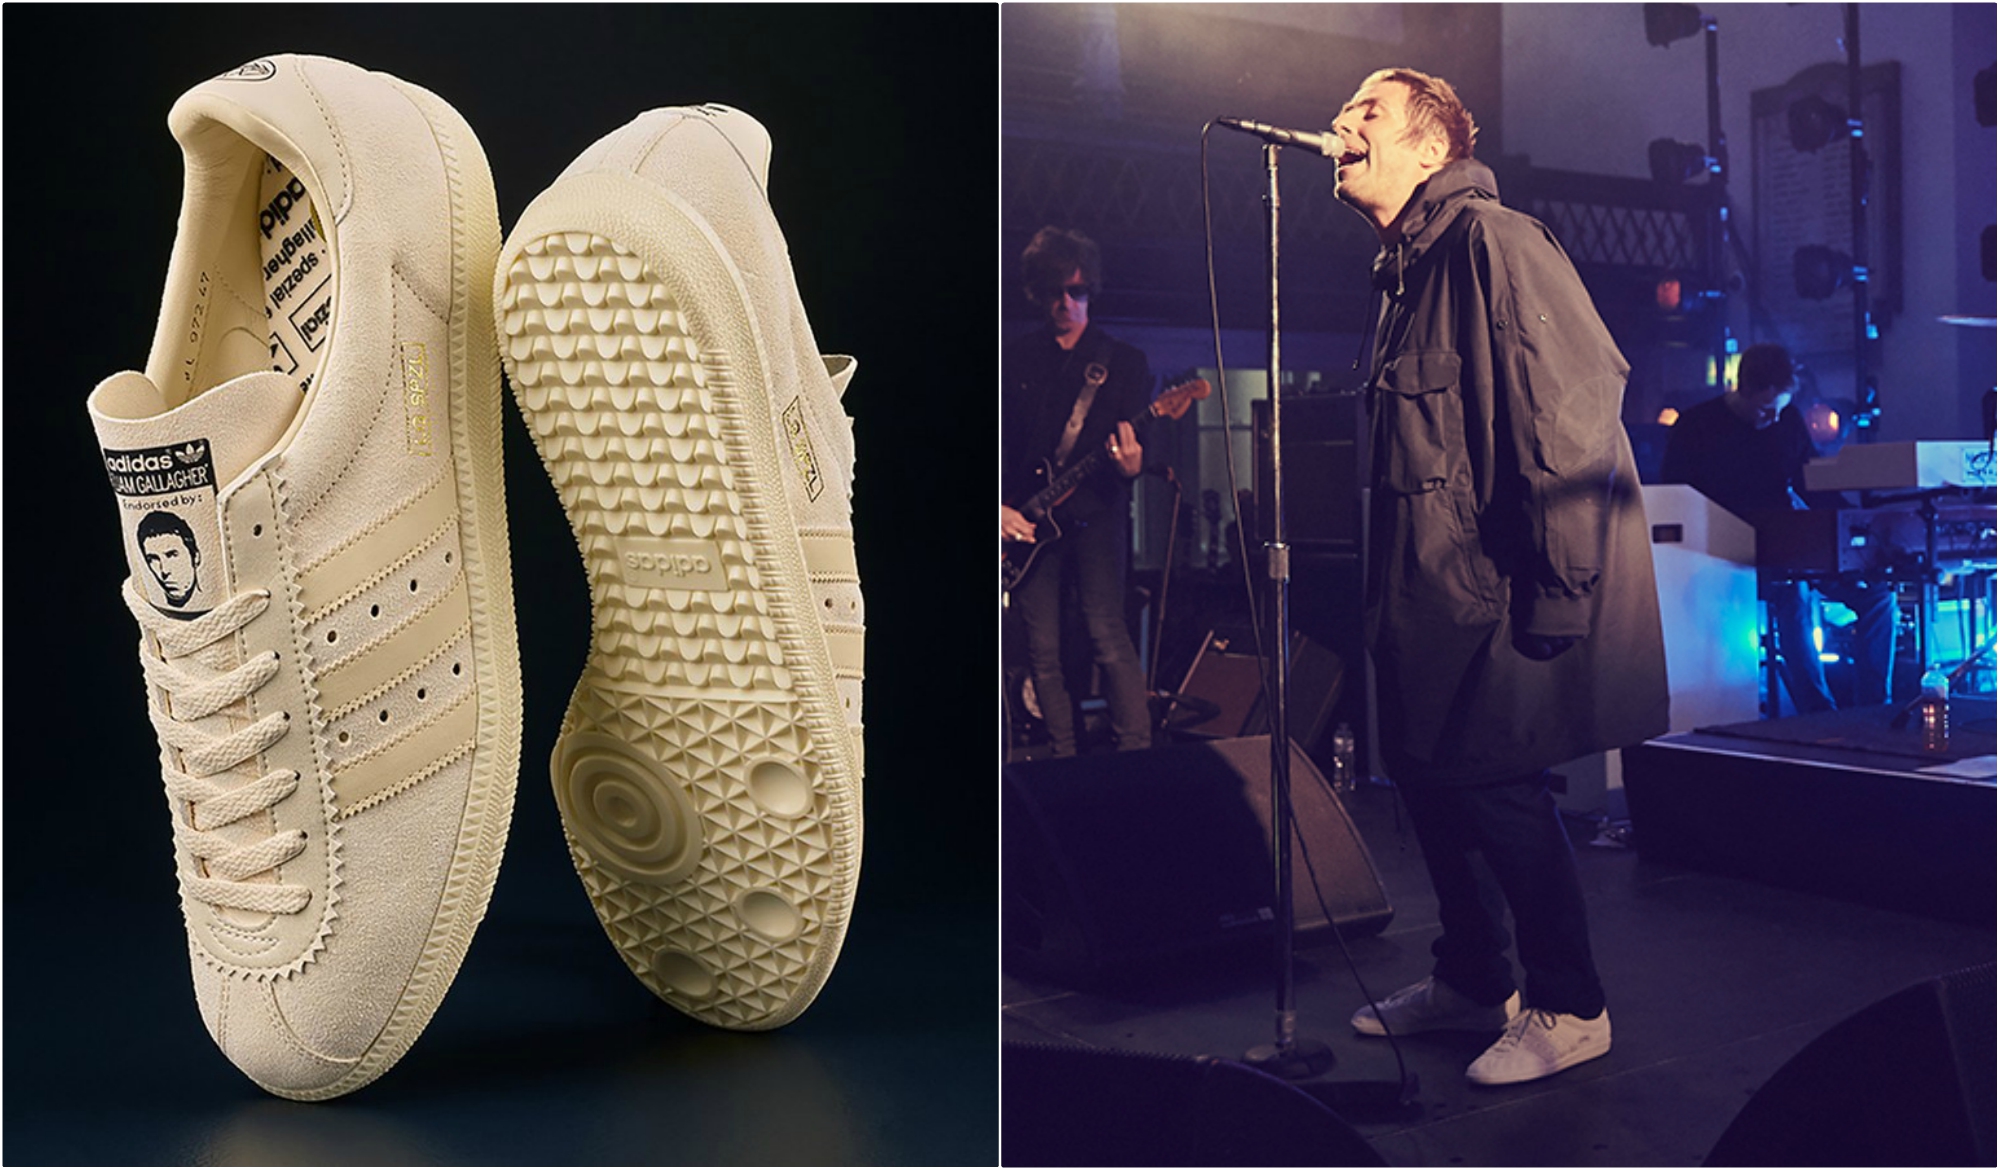 Liam Gallagher Teams With Adidas for Limited Edition 'LG Spezial